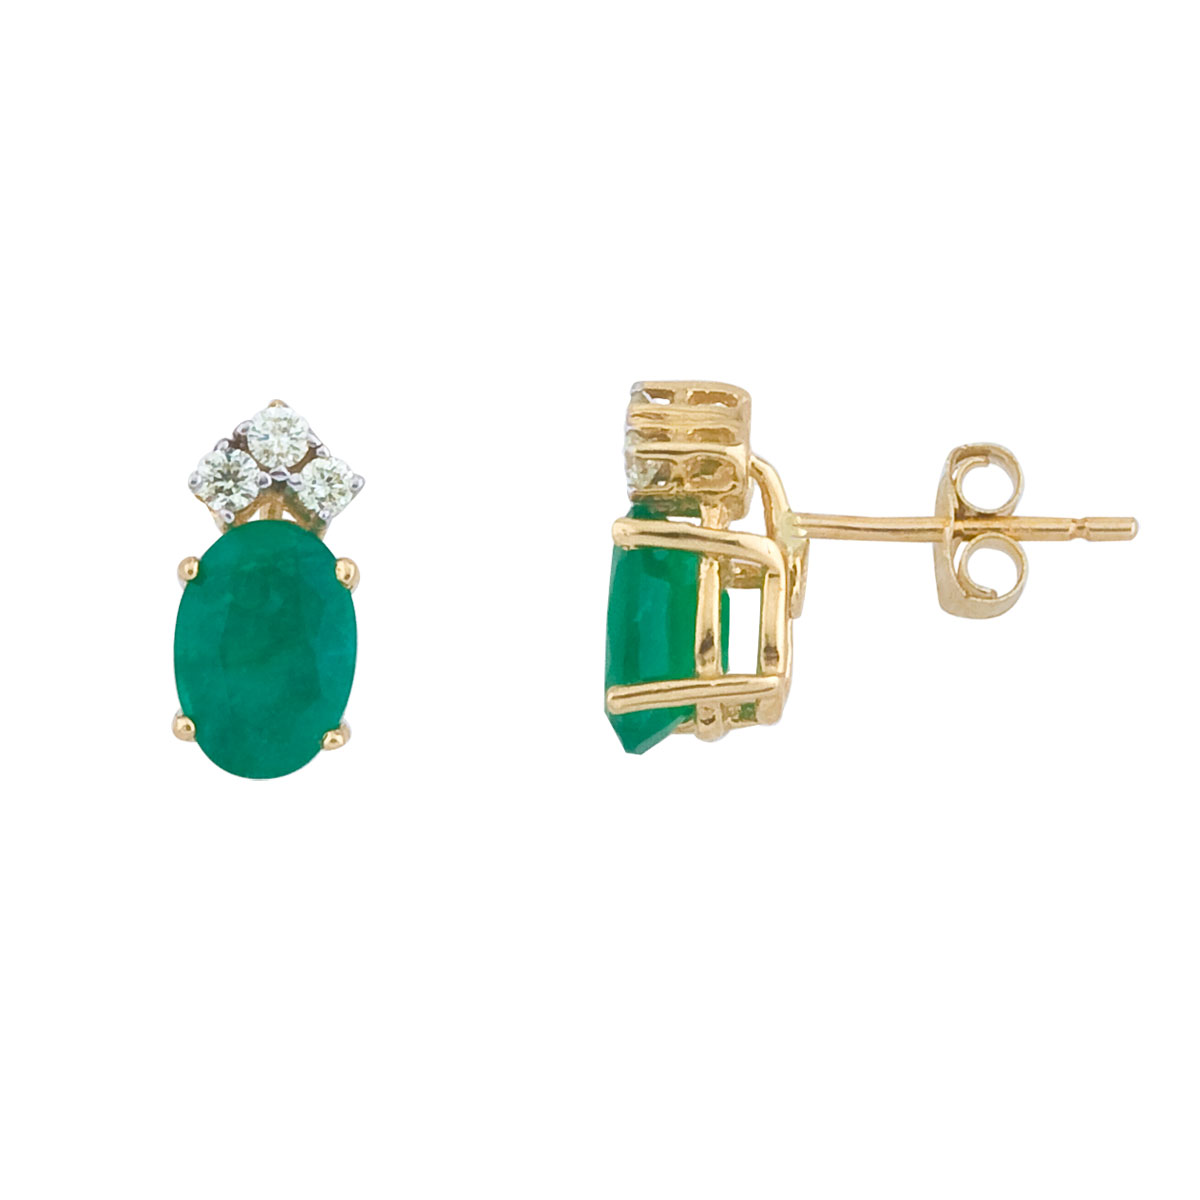 These 7x5 mm oval shaped emerald earrings are set in beautiful 14k yellow gold and feature .12 total carat diamonds.